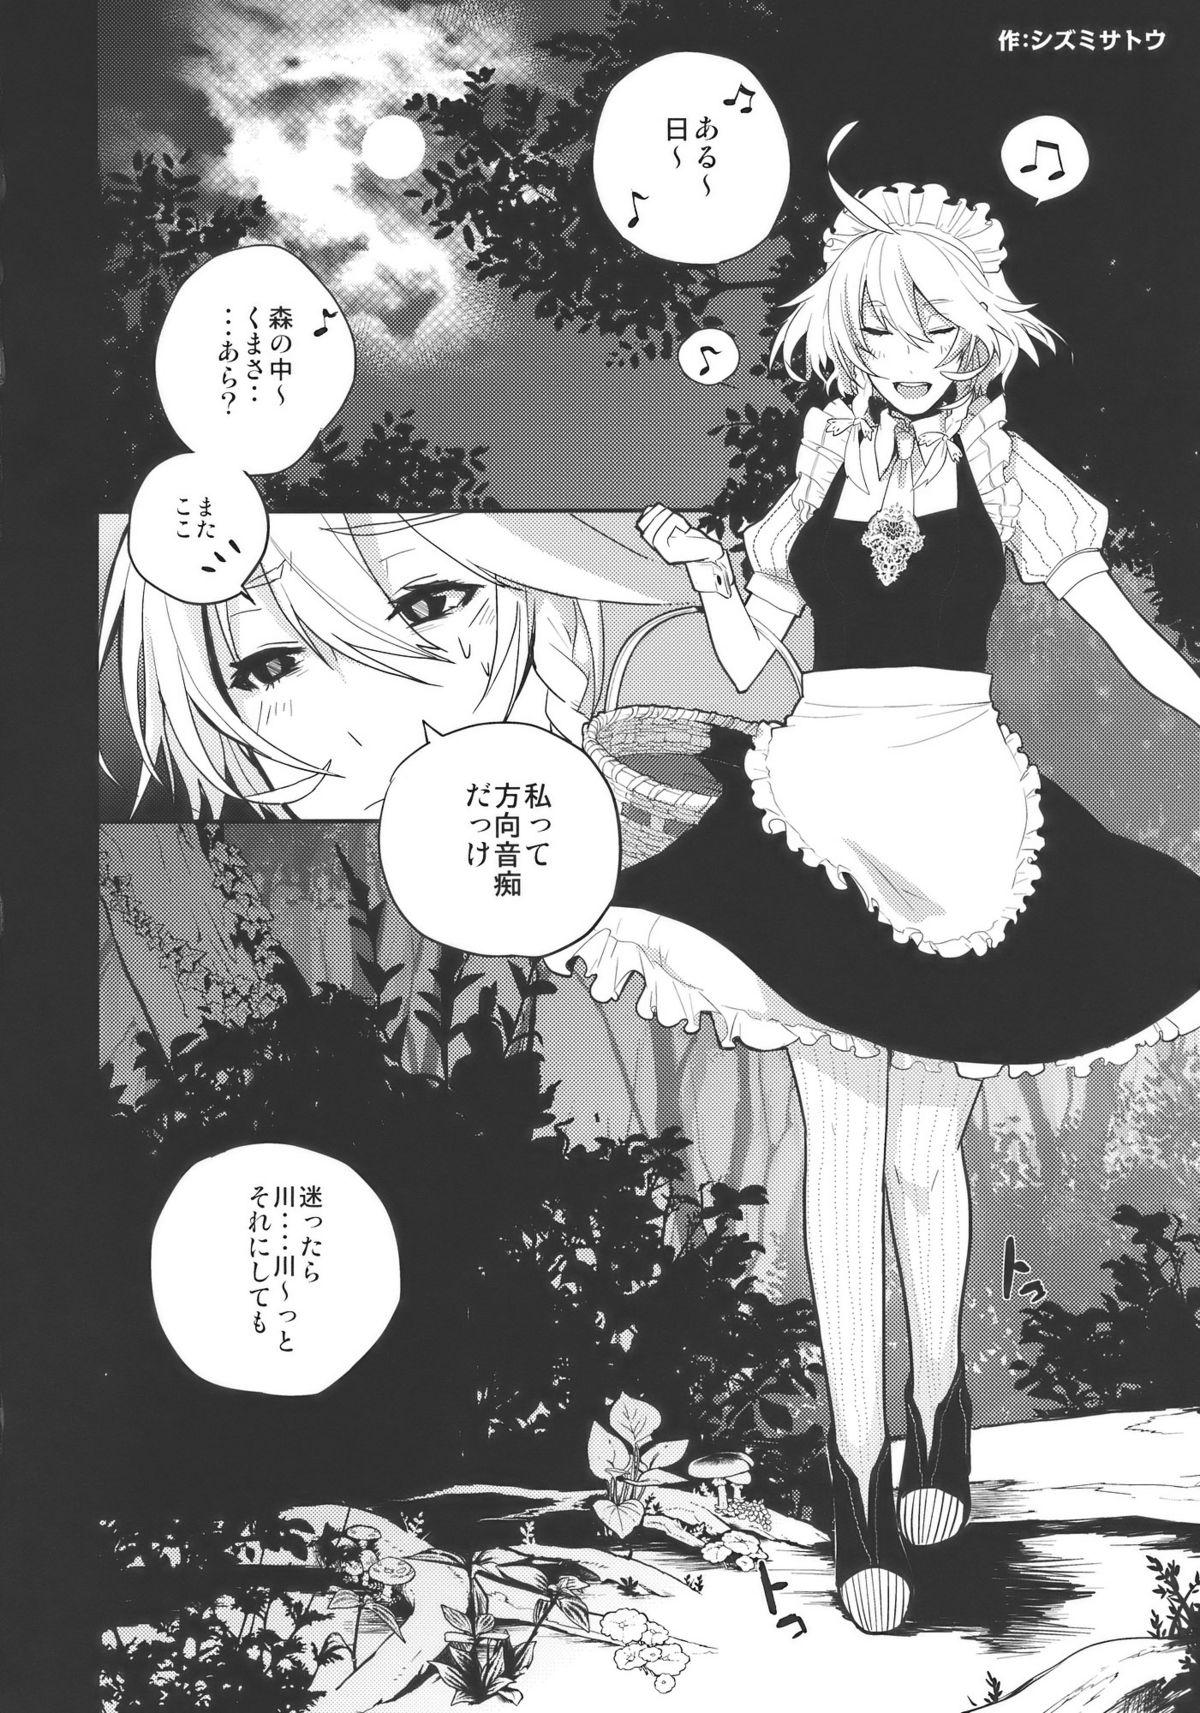 Nudes fairy story - Touhou project Crossdresser - Page 4